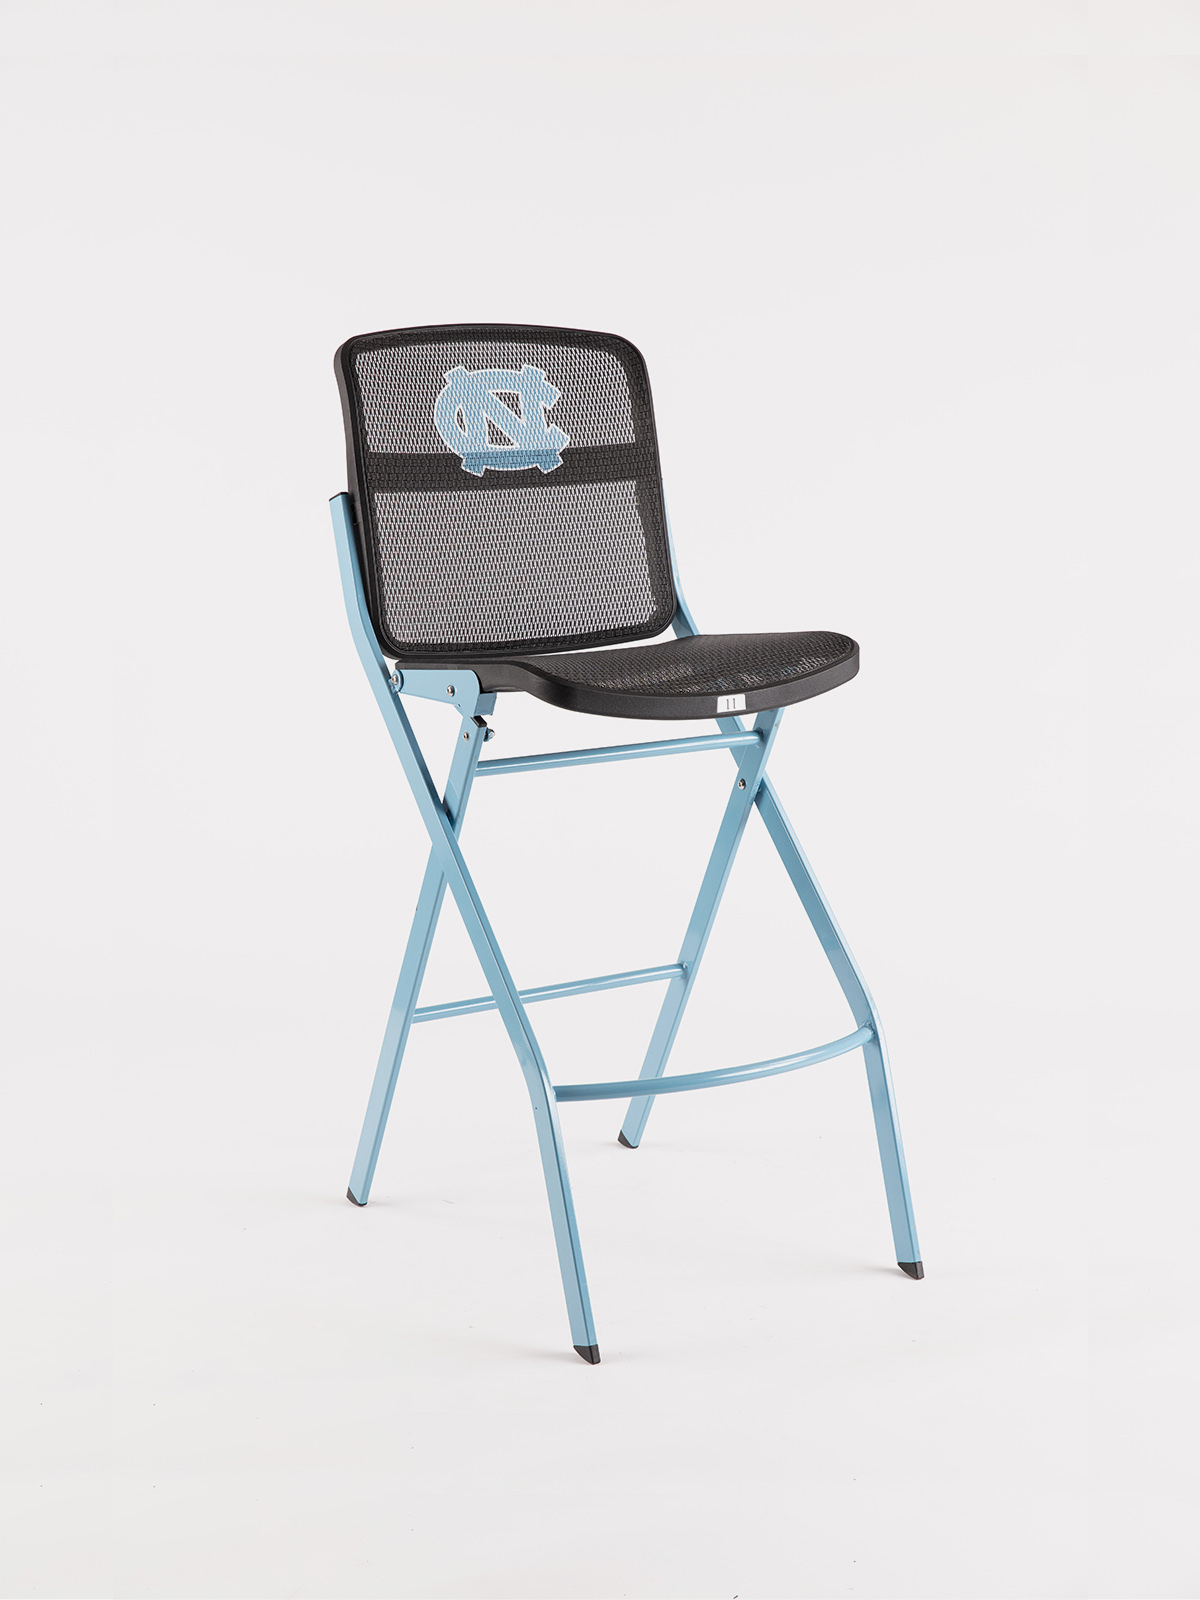 Tall UNC 4 Topps folding seat on white background